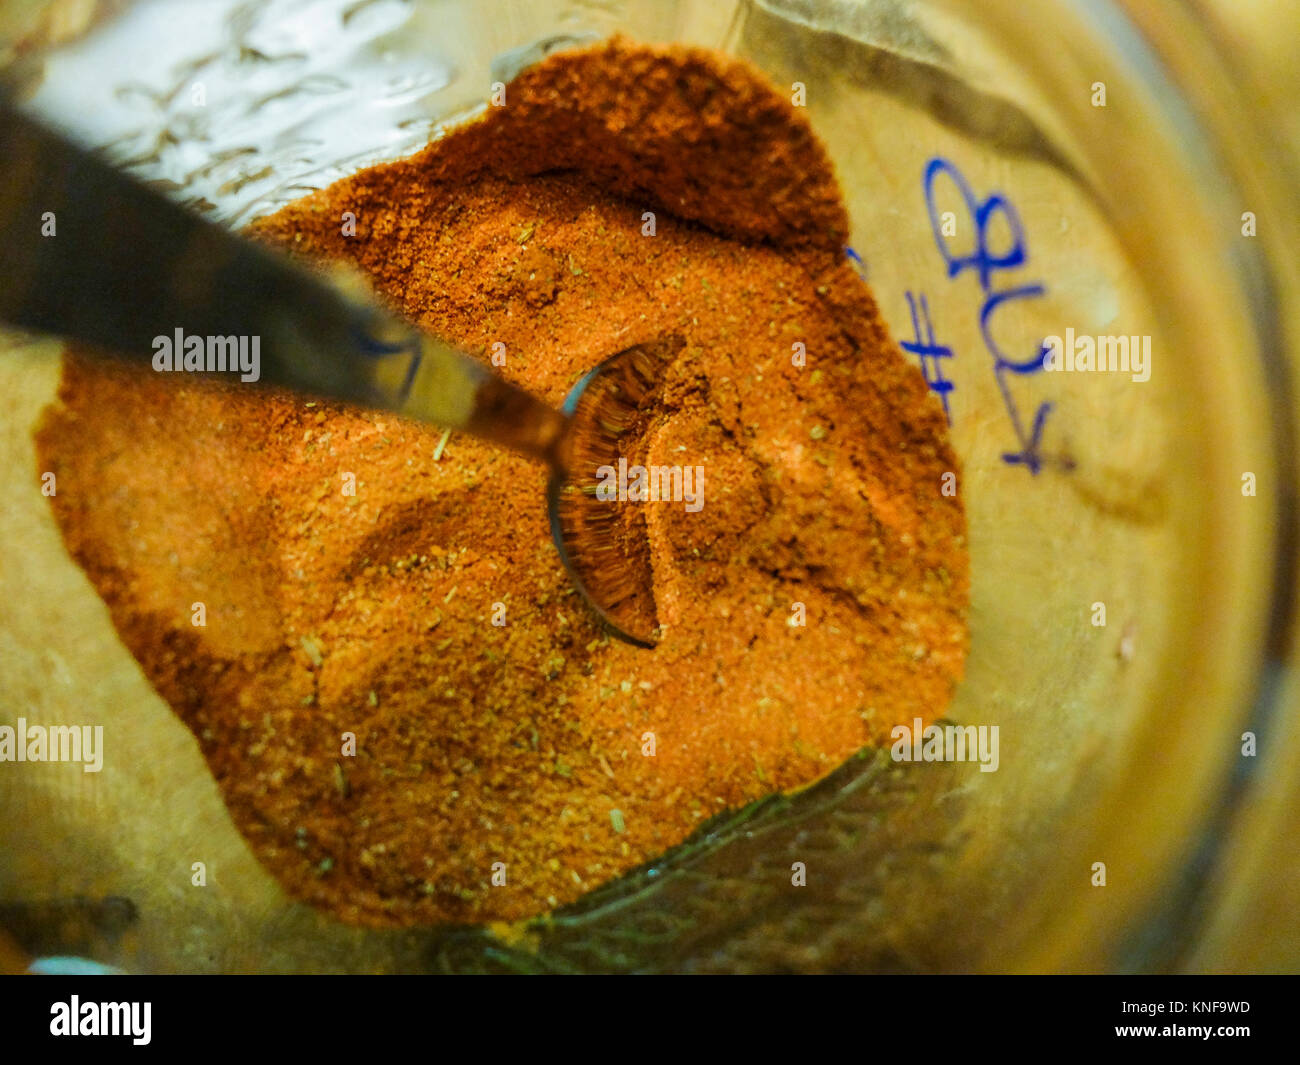 Jar with ready mix rub containing paprika and other spices with a spoon slipped Stock Photo